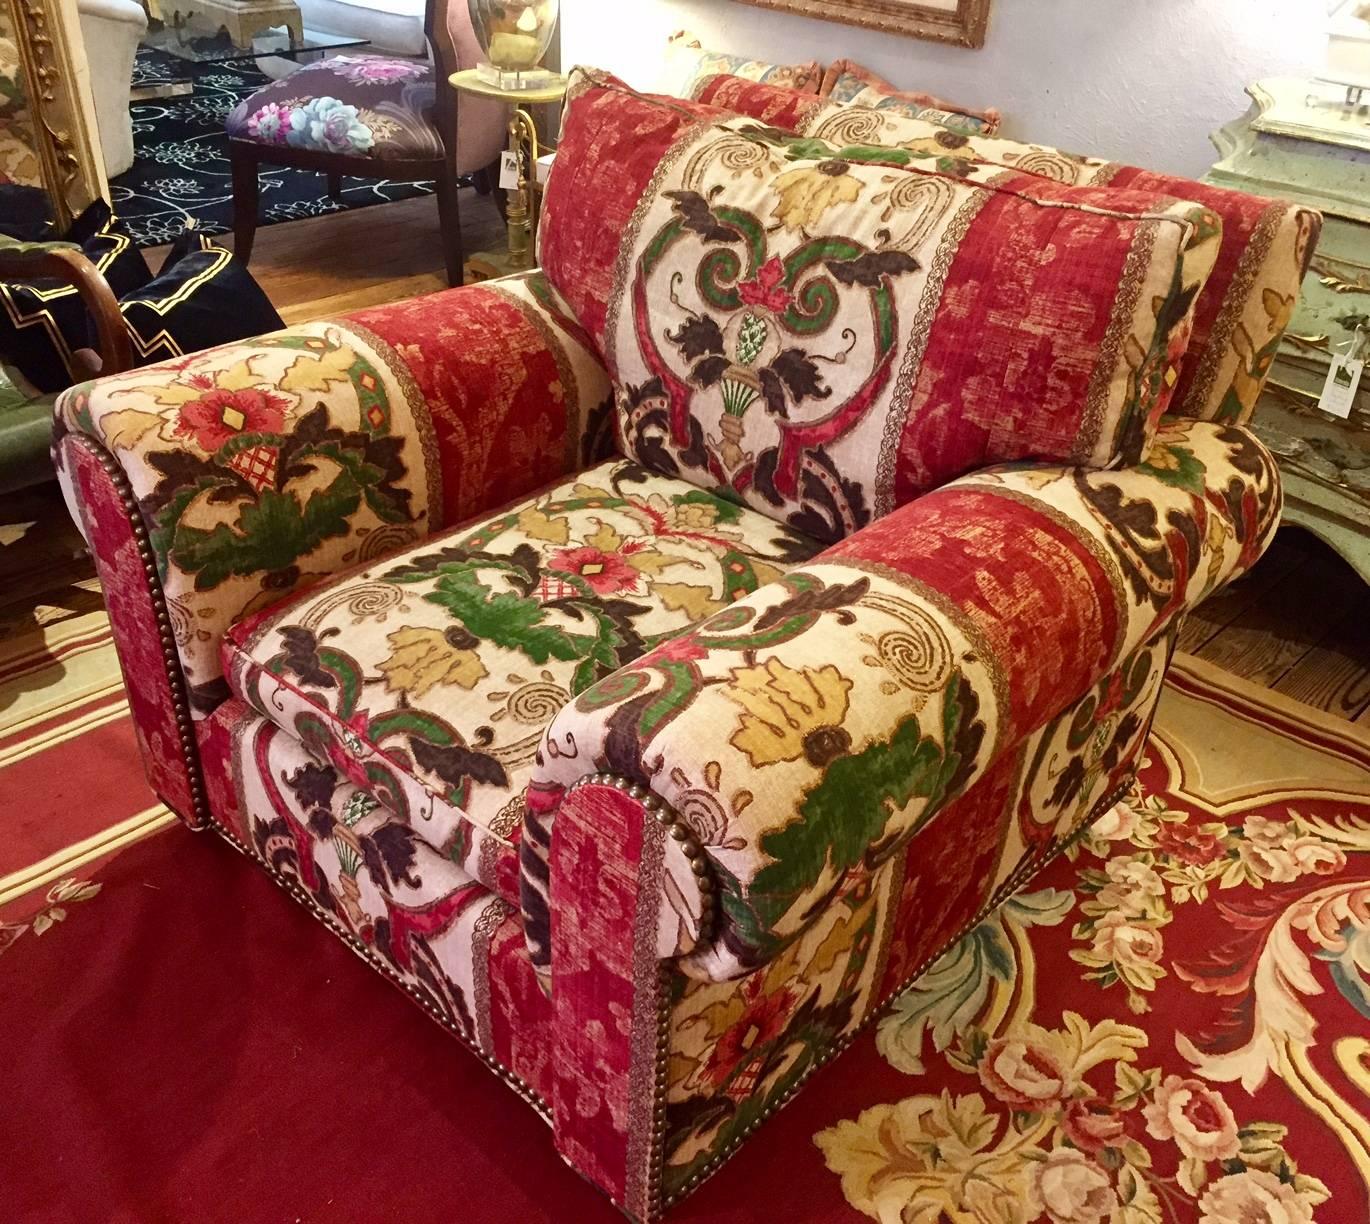 Two heavenly sumptuous club chairs, oversized and unbeliveably comfy, attributed to George Smith. No label, but from a top drawer designer on the main line. Gorgeous tapestry like fabric in jewel tones of maroon, green, cream and gold.